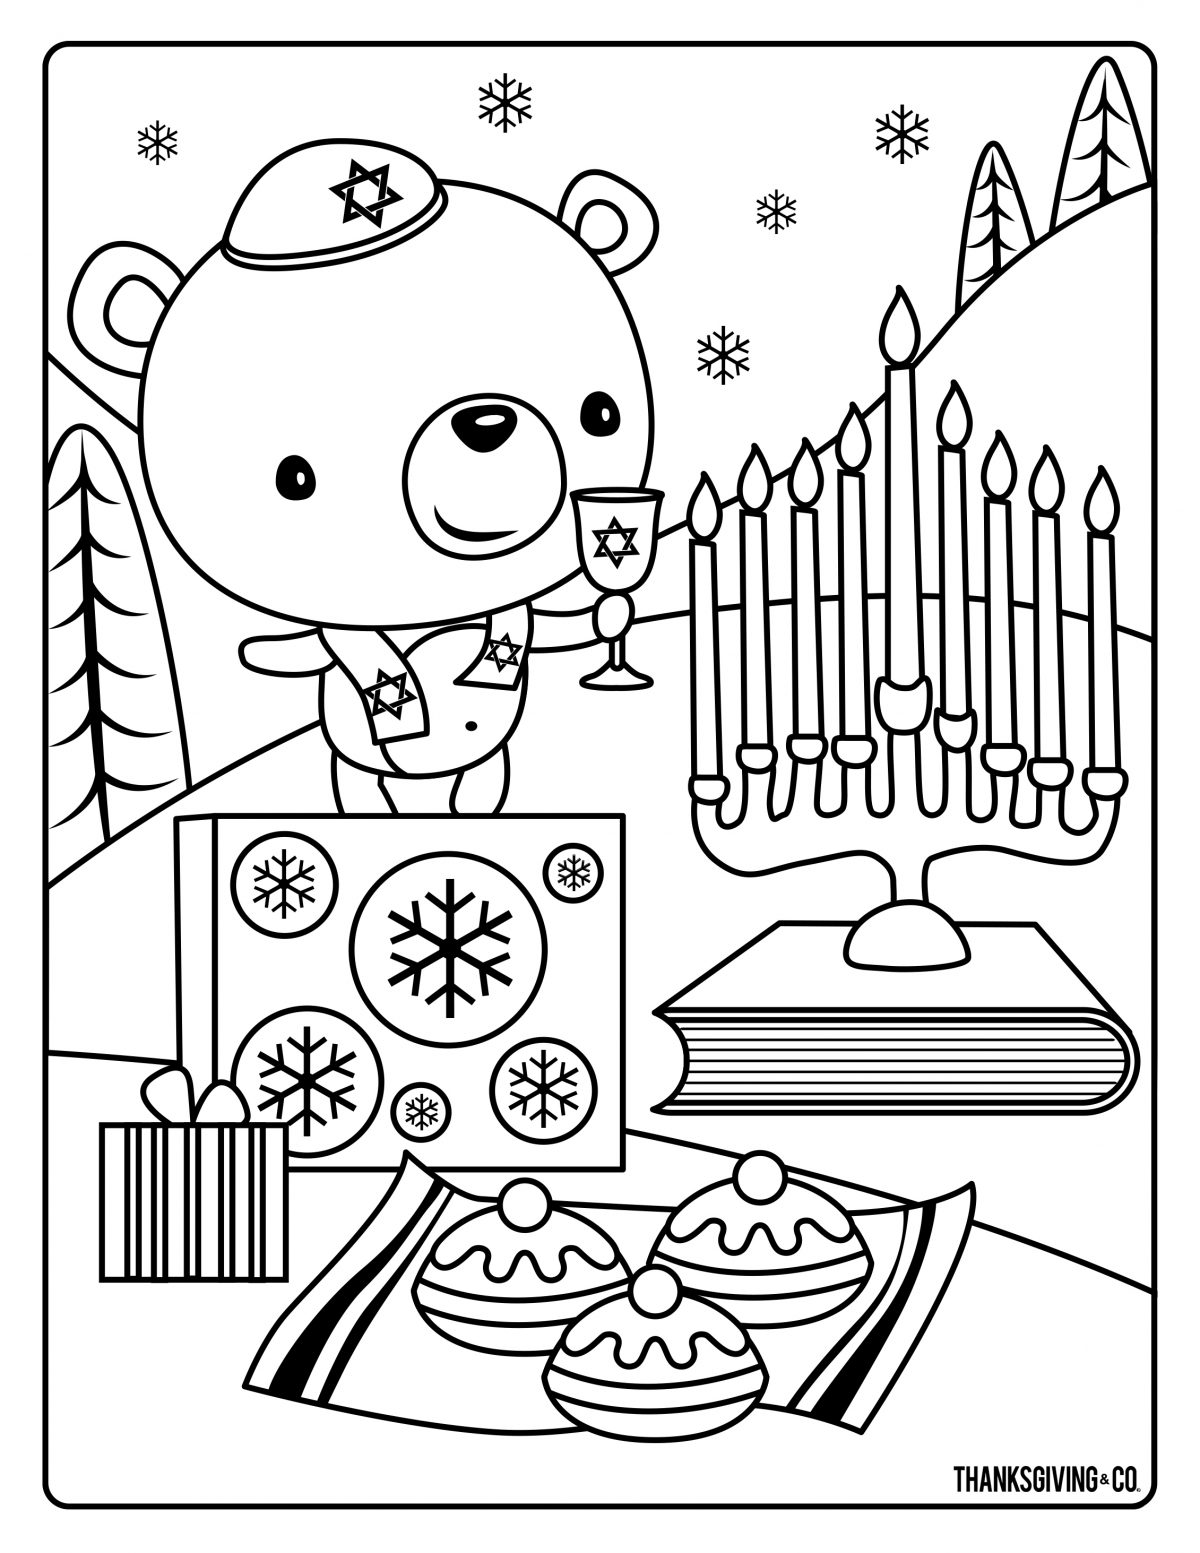 4 Hanukkah coloring pages you can print and share with your kids